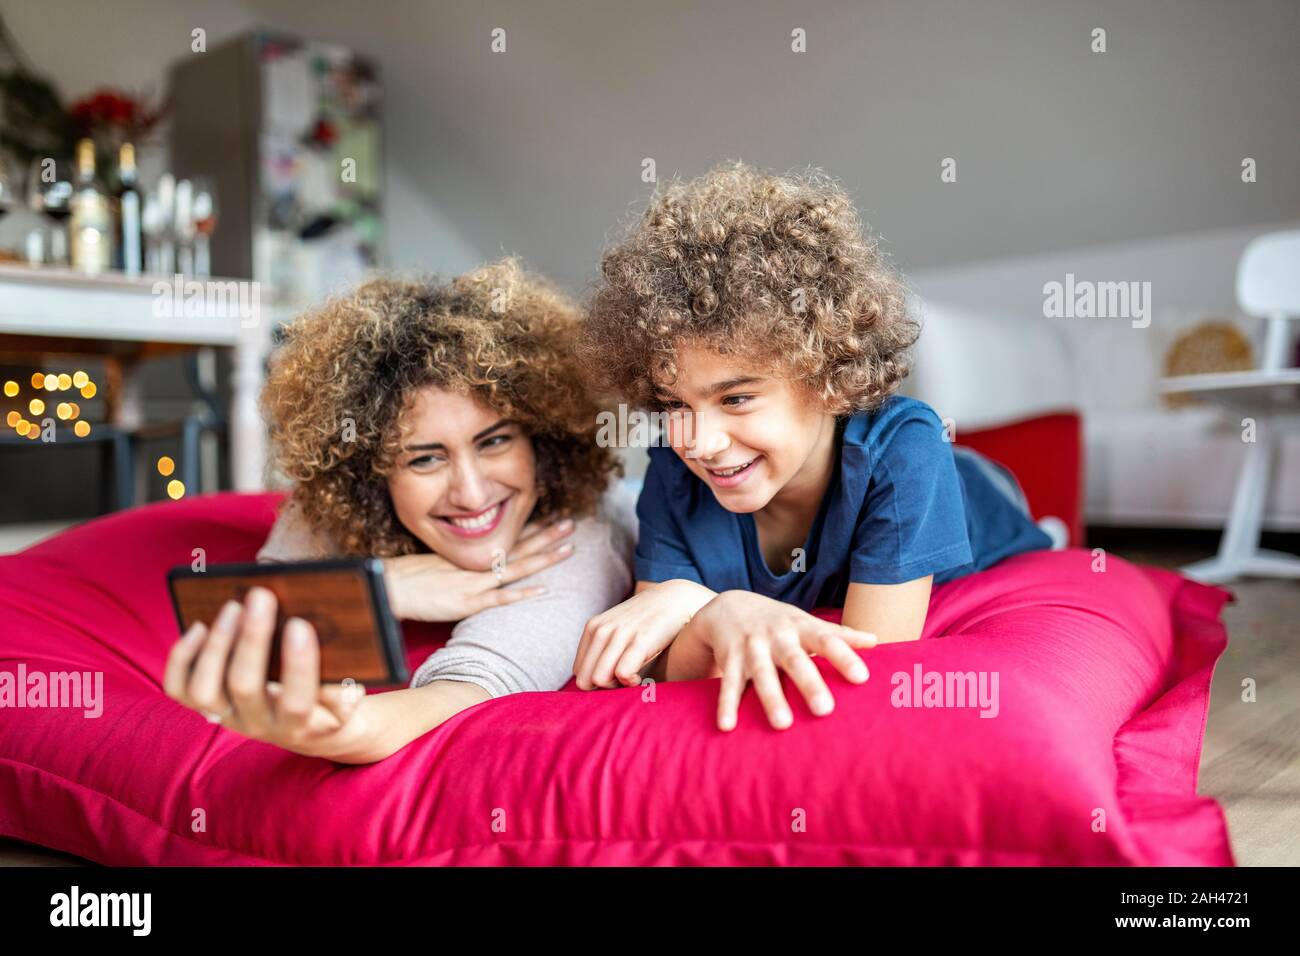 Mother and son watching a video on smartphone, lying on big pillow Stock Photo